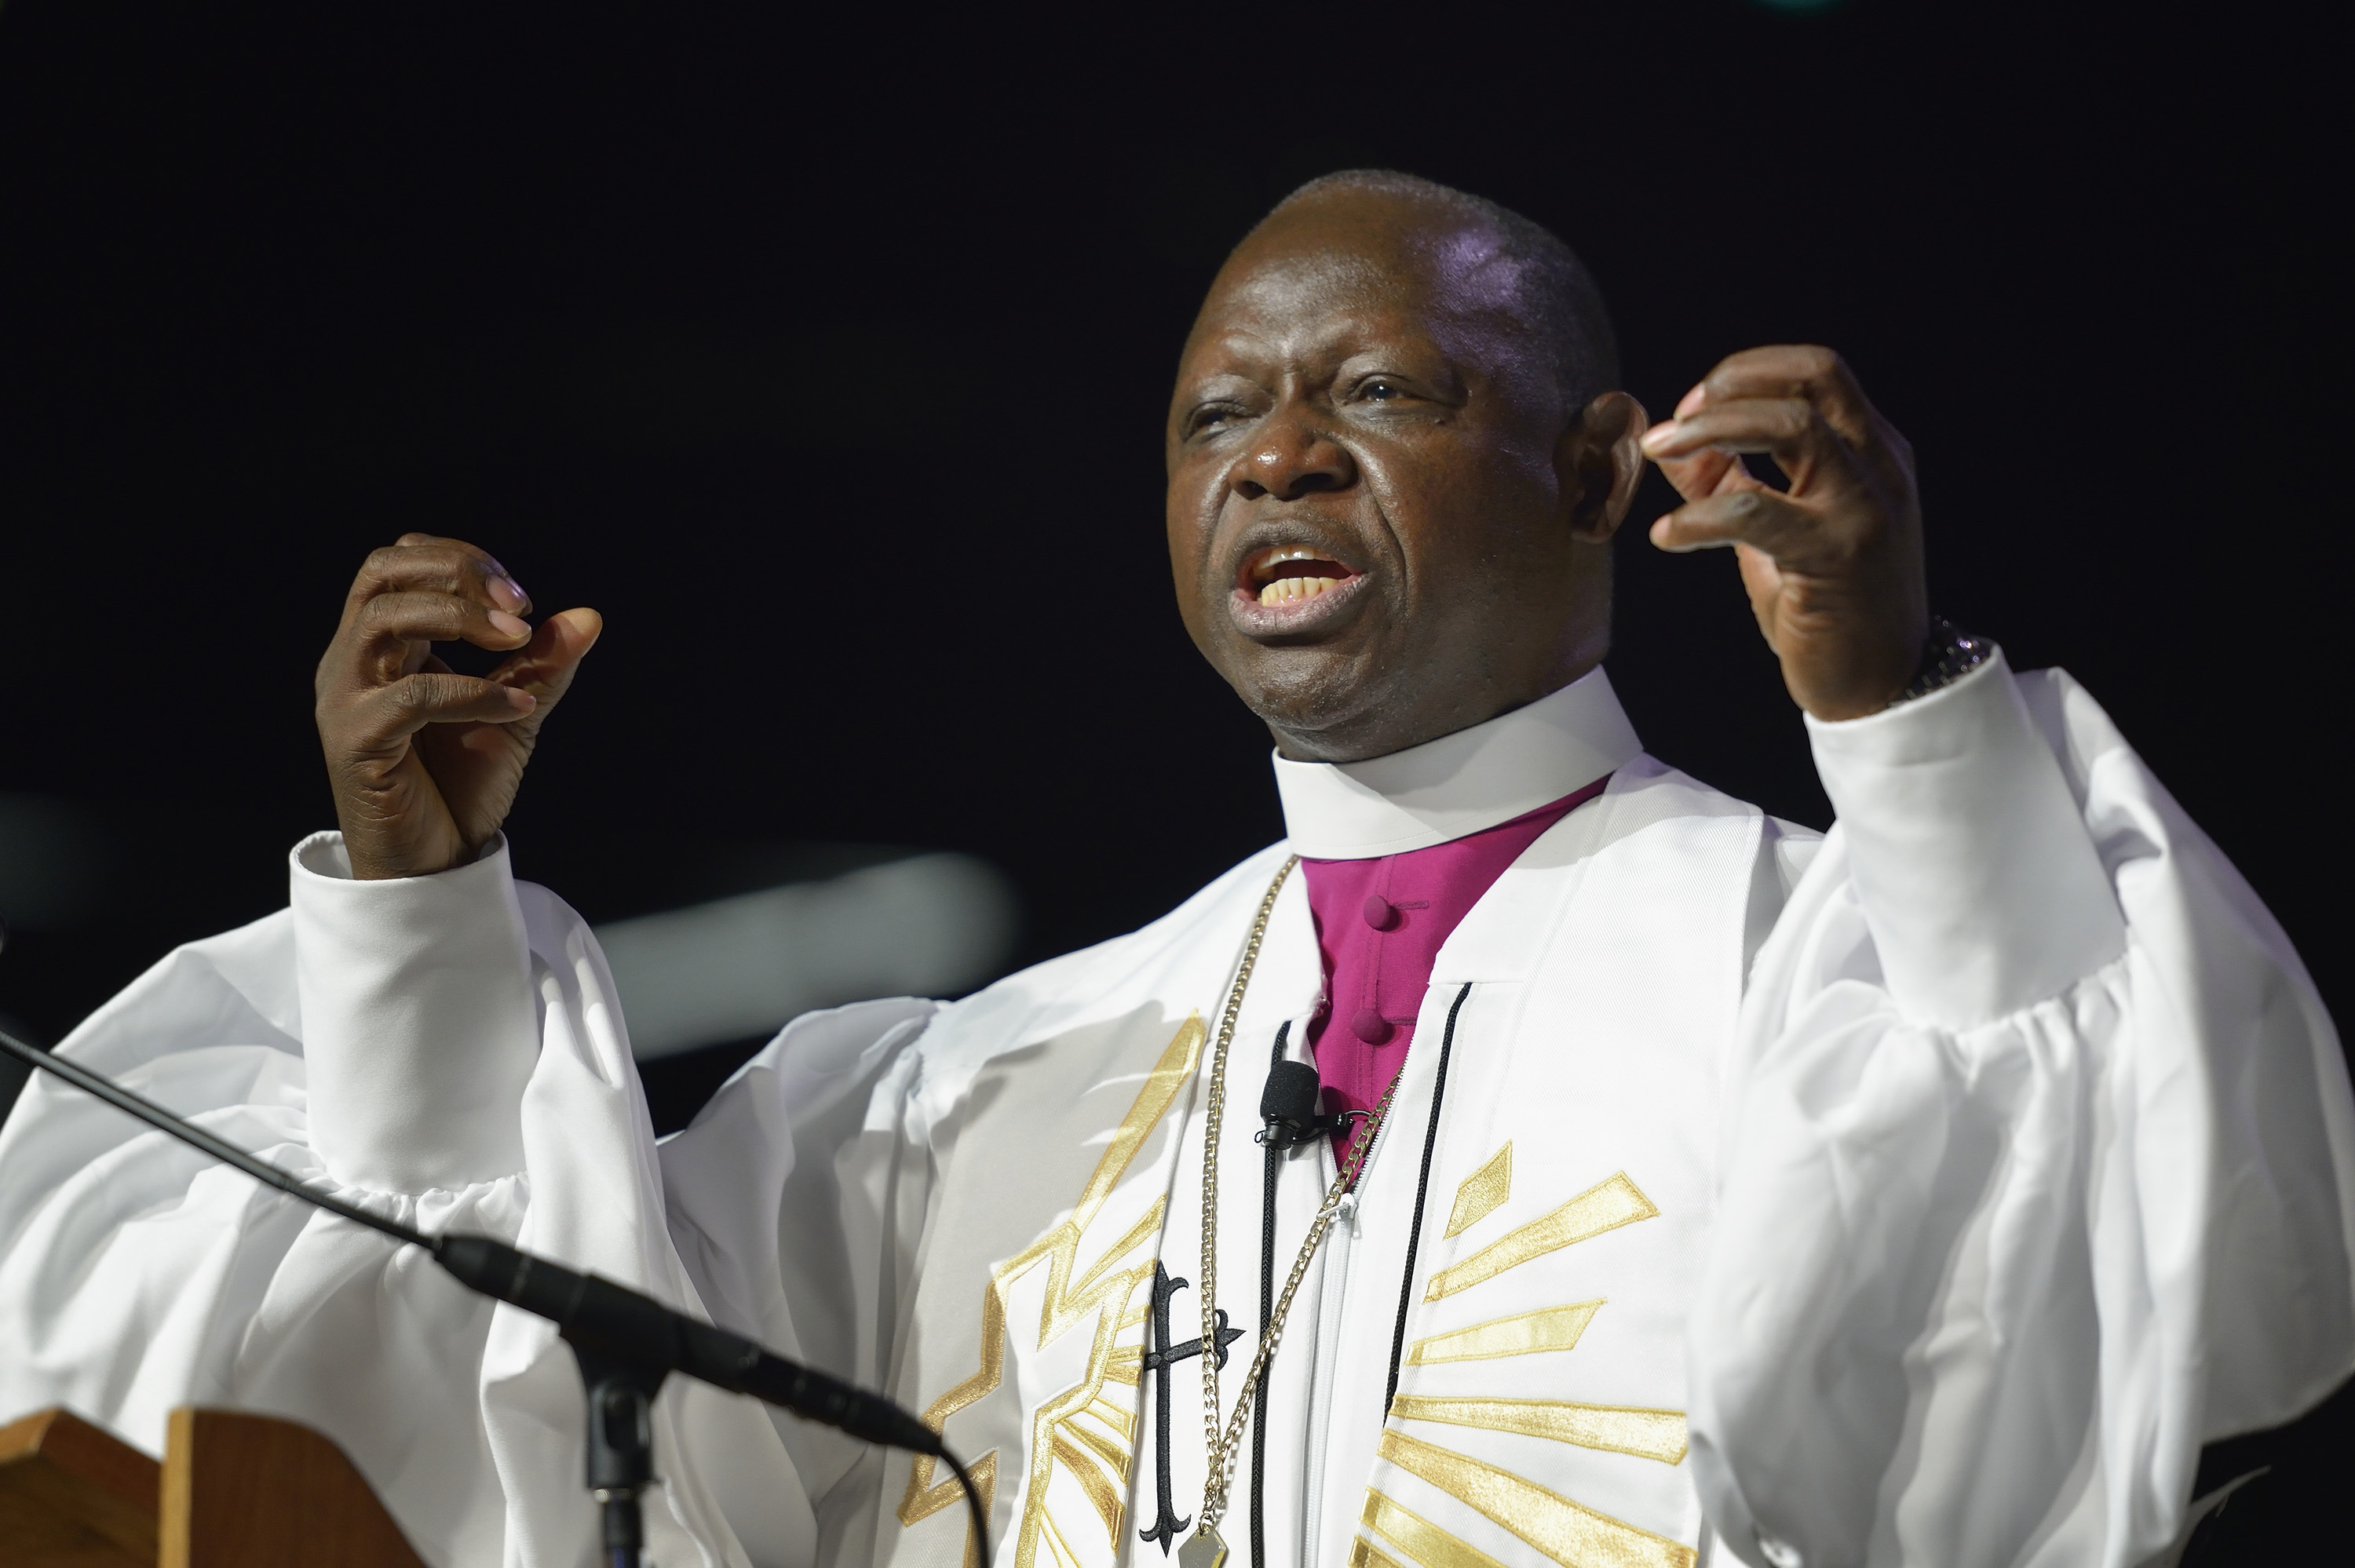 Bishop John Yambasu gives the sermon during morning worship at the 2016 United Methodist General Conference in Portland, Ore. File photo by Mike DuBose, UMNS.